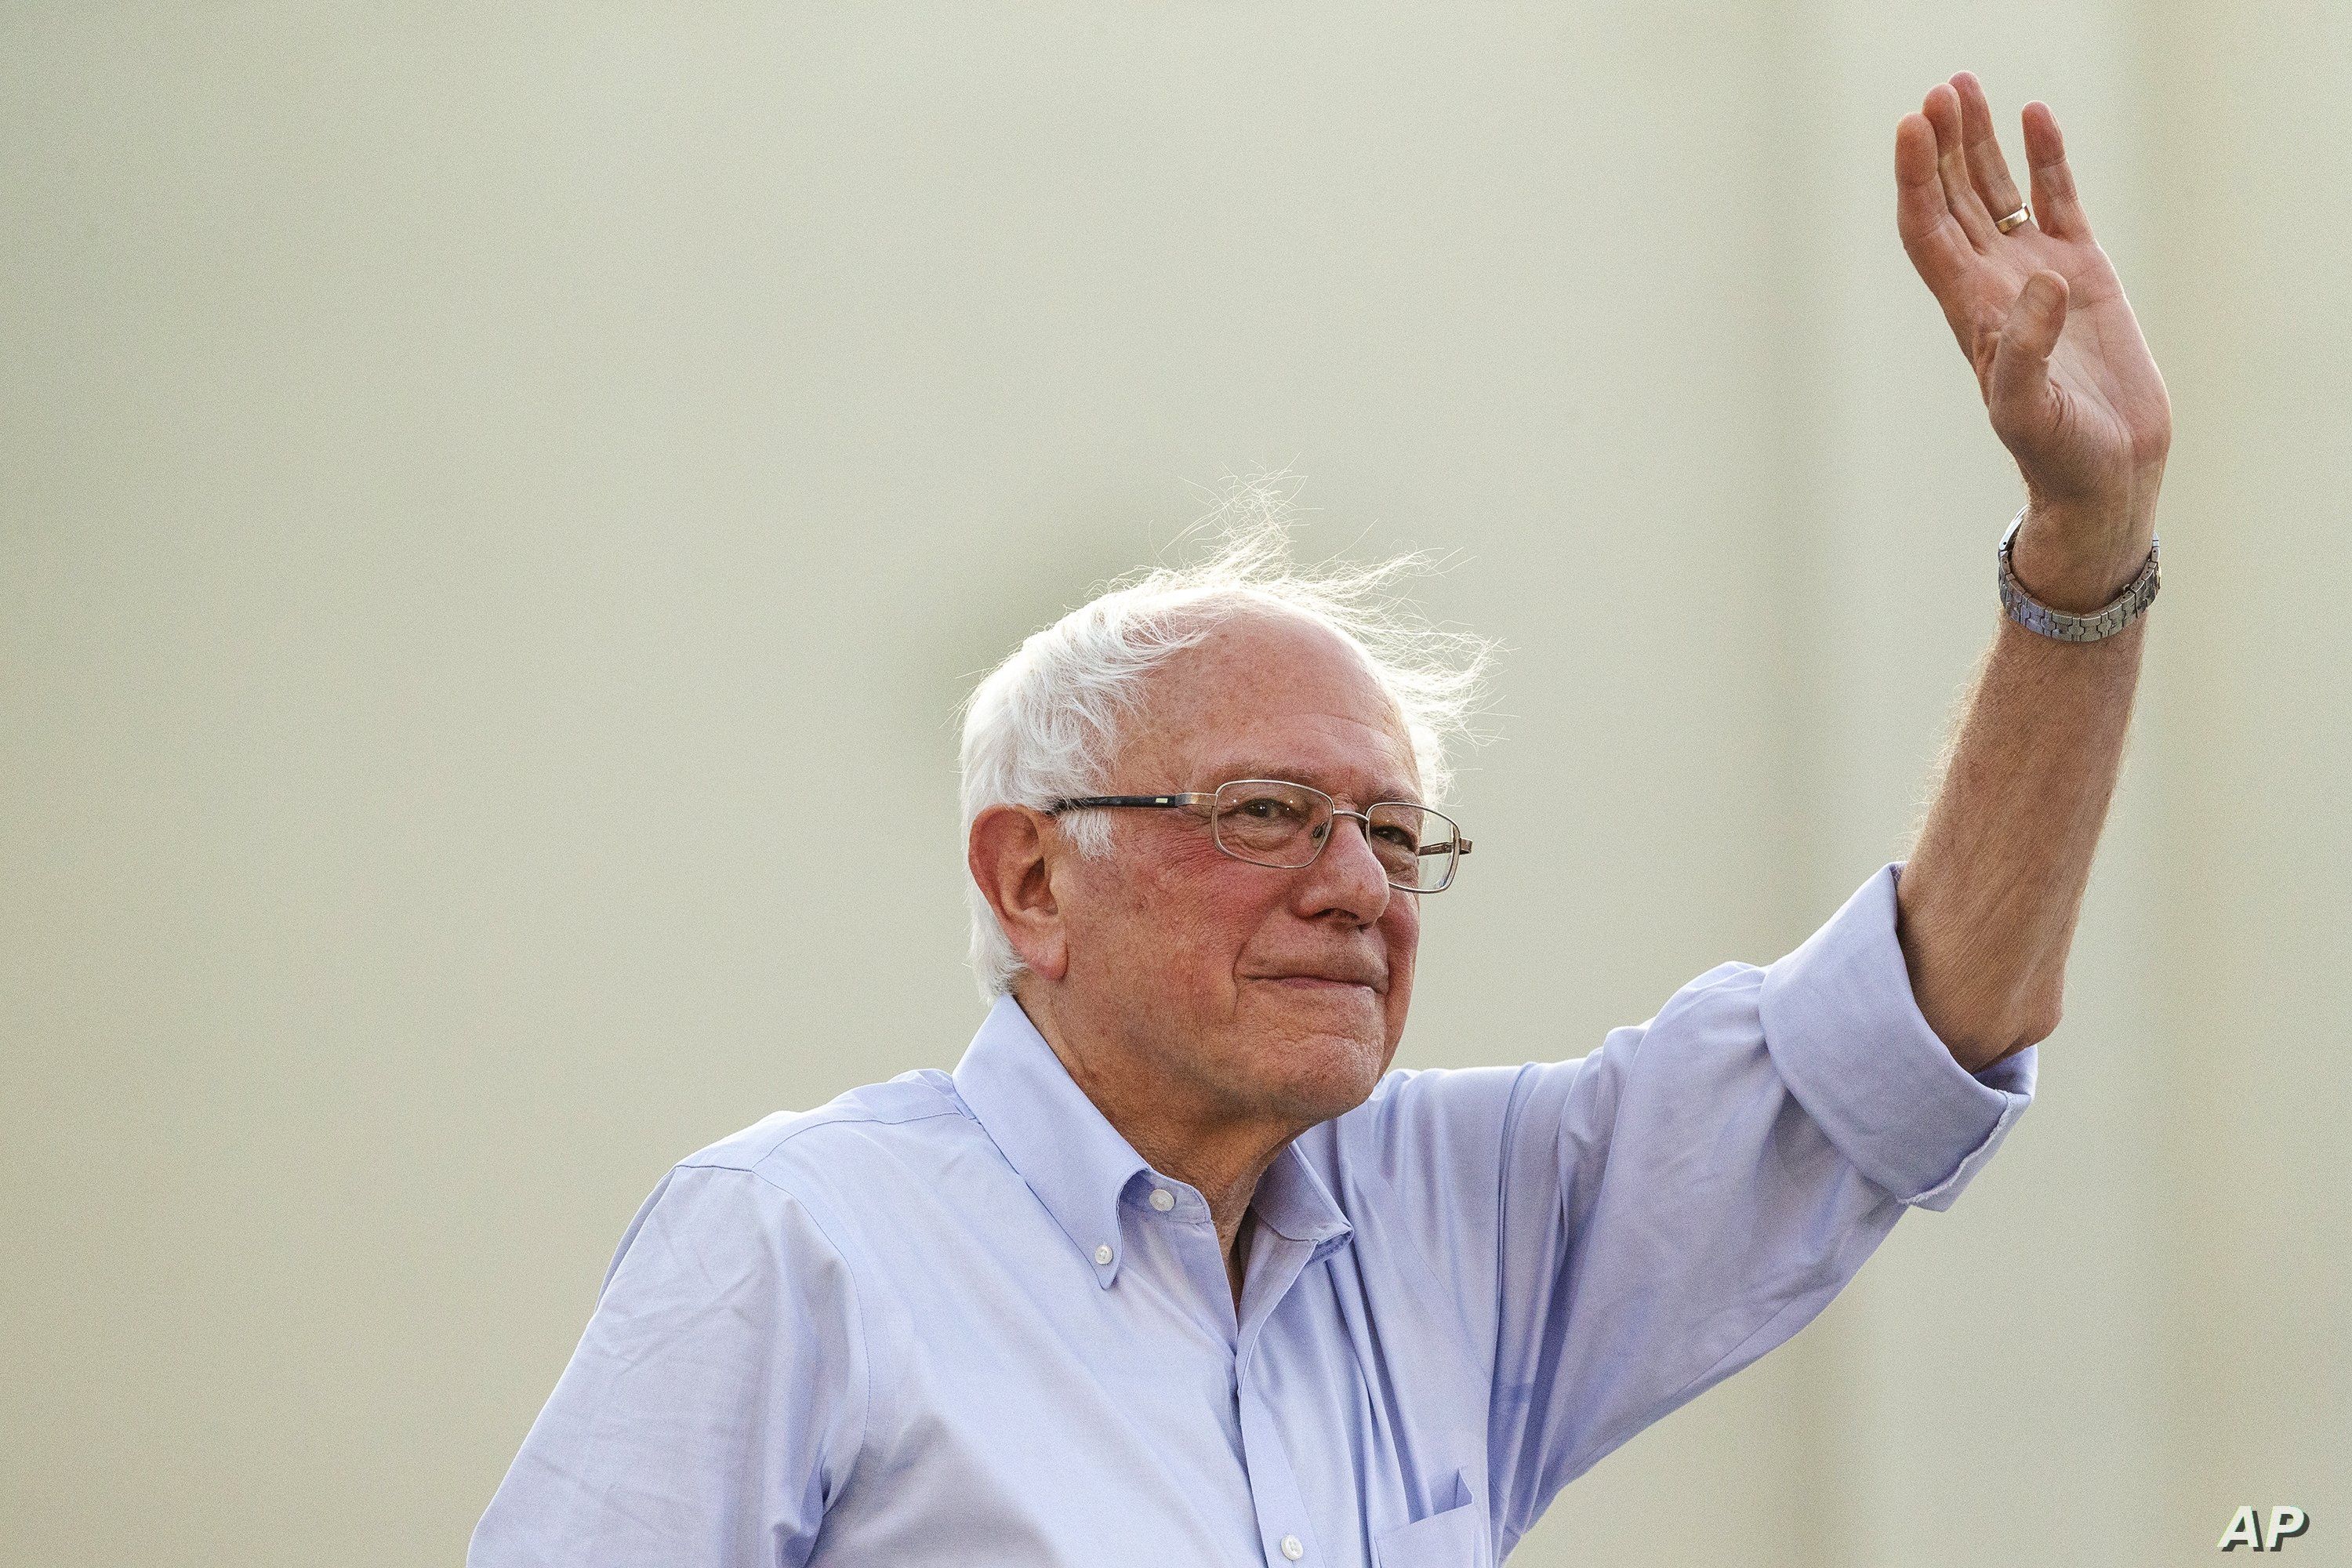 Democratic presidential candidate Sen. Bernie Sanders, I-Vt., waves to supporters as he arrives at a rally at Santa Monica High School Memorial Greek Amphitheater in Santa Monica, Calif., July 26, 2019. 